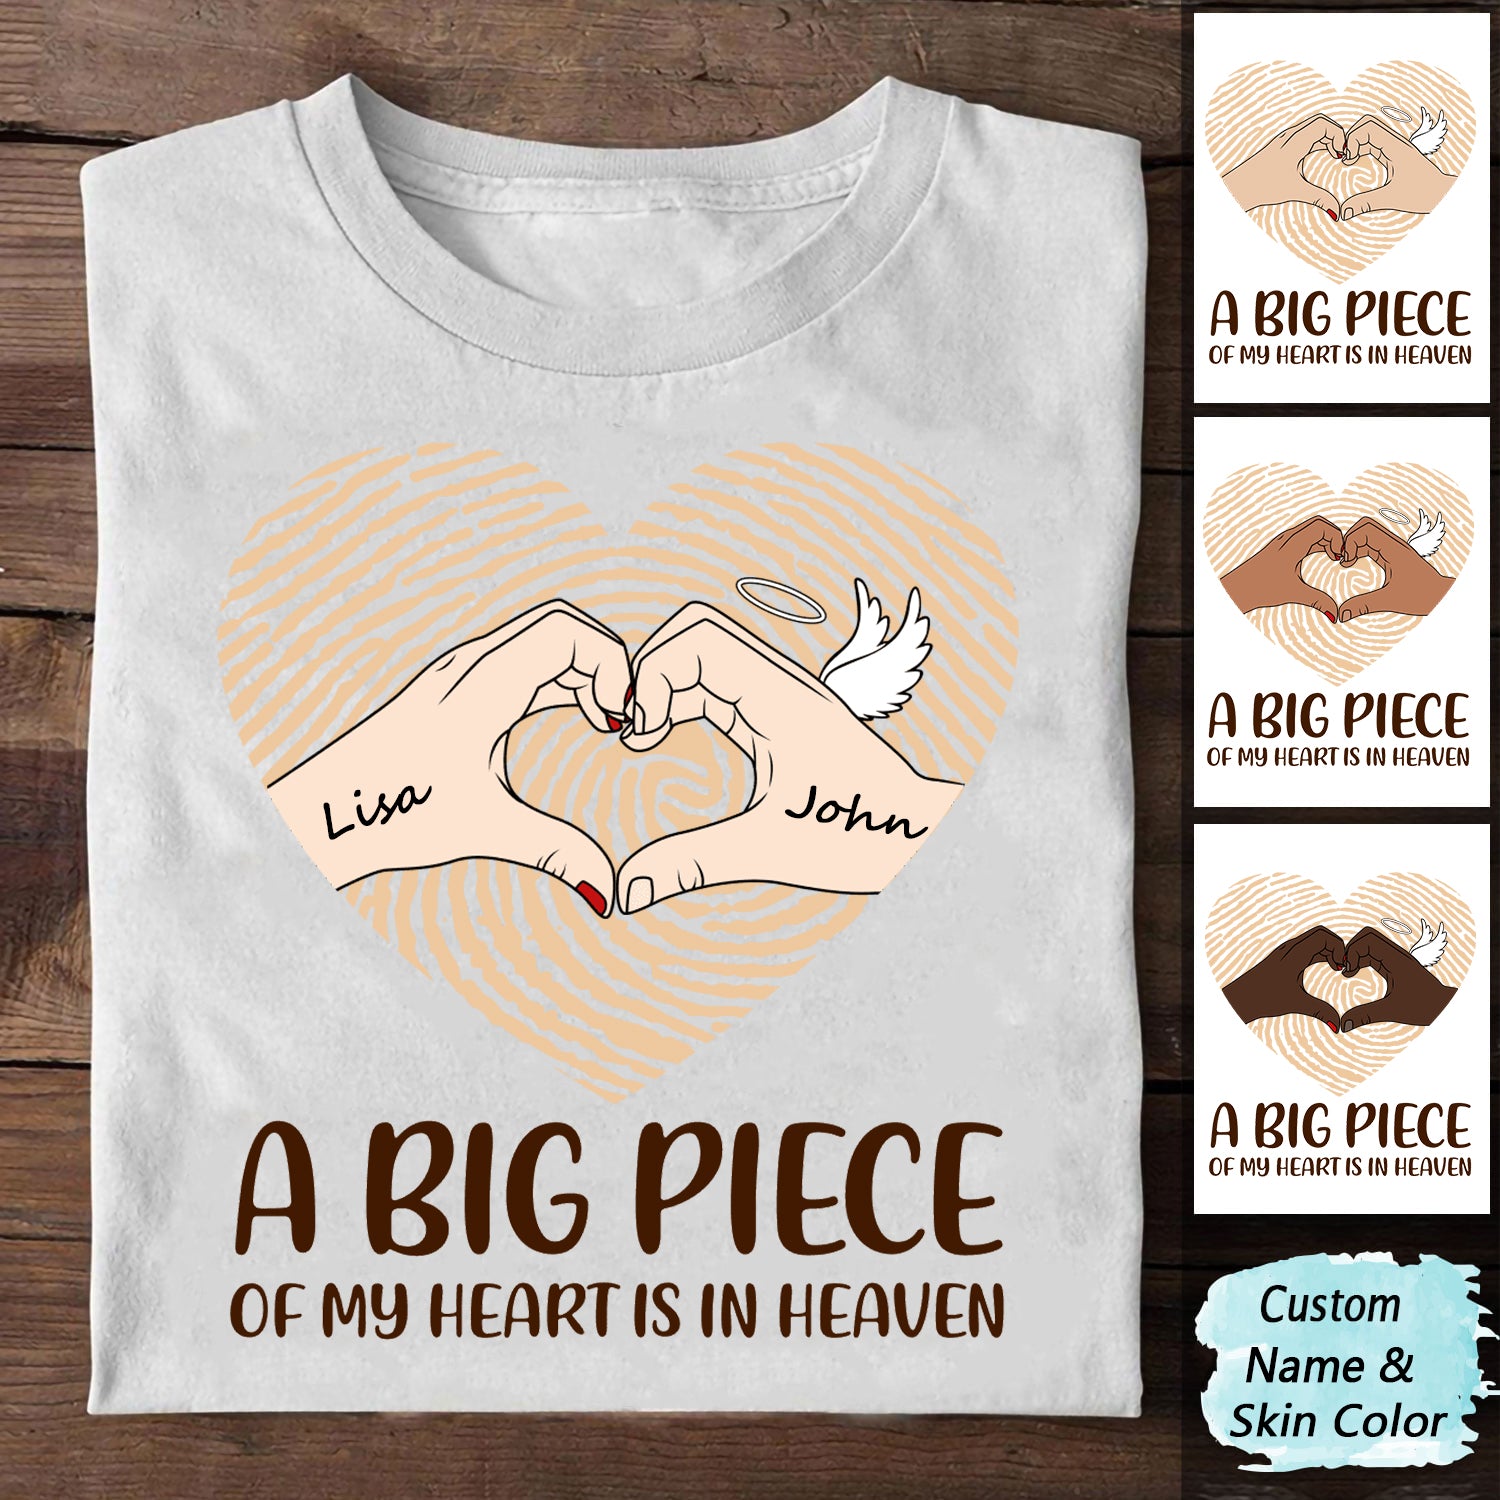 A Big Piece Of My Heart Is In Heaven Heart Shape Personalized T-Shirt